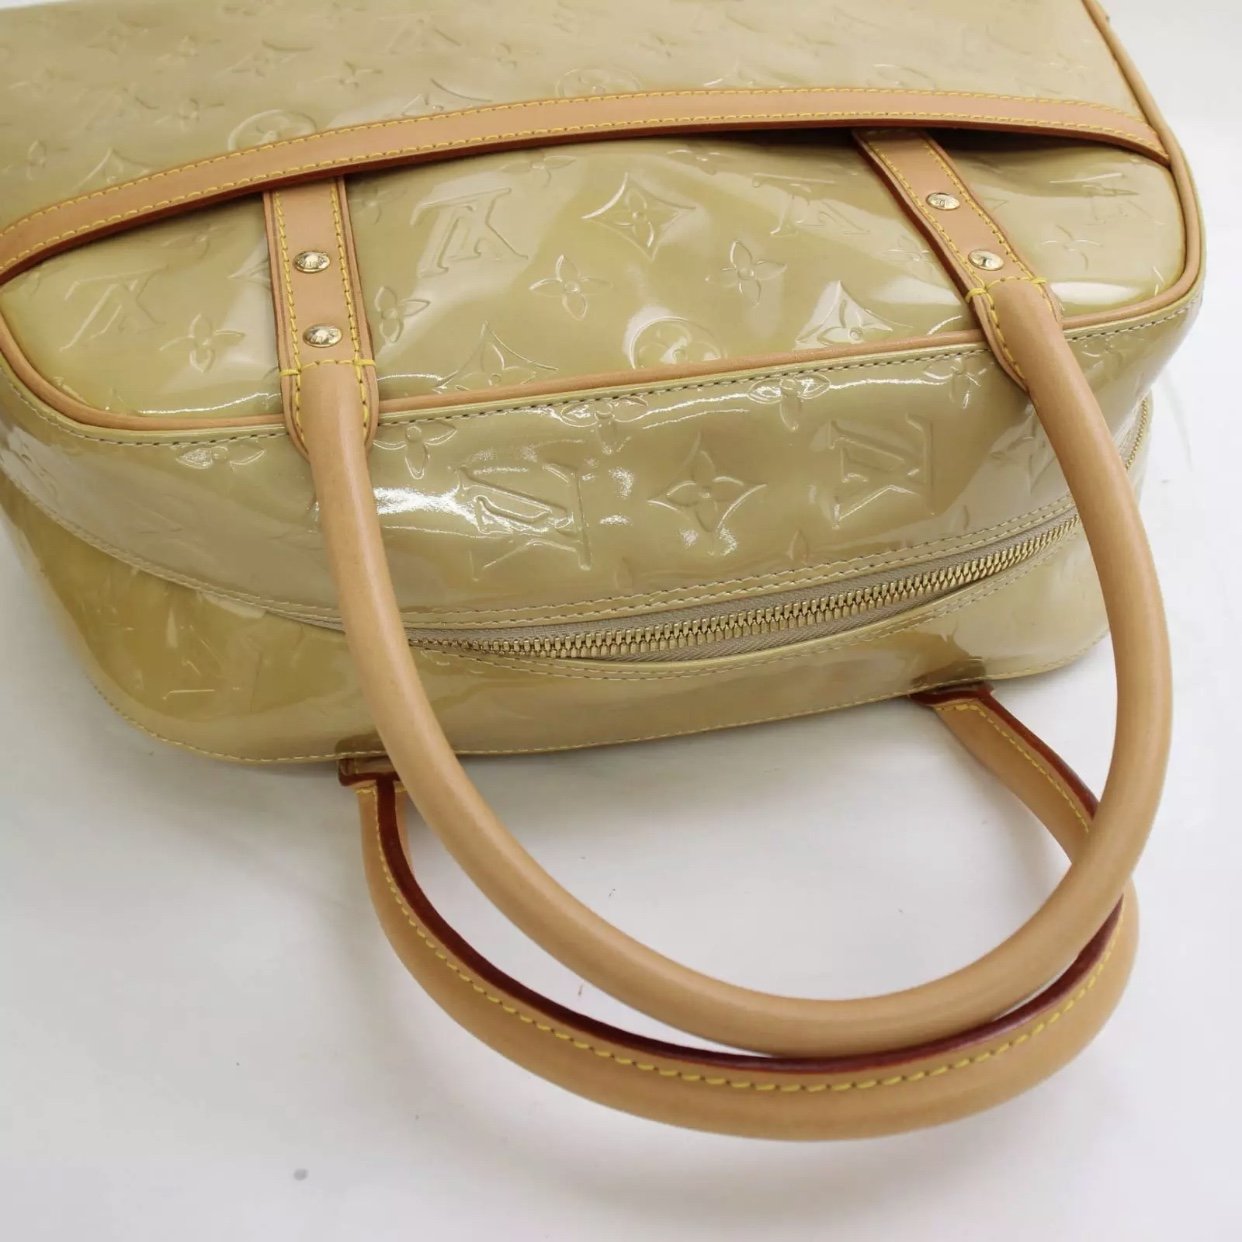 Tompkins square patent leather handbag Louis Vuitton Gold in